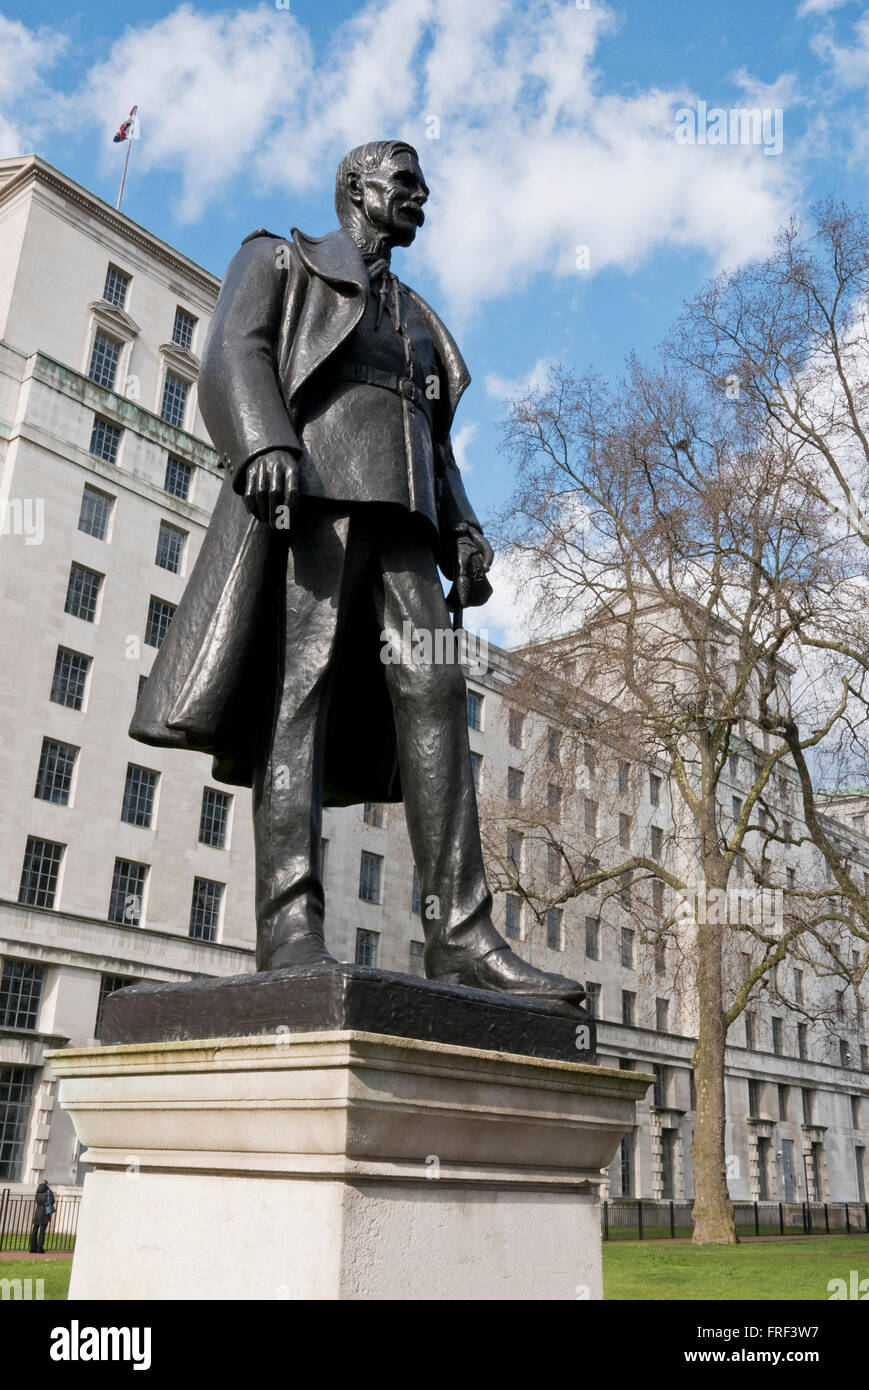 Statue of Air Marshal Lord Hugh Montague Trenchard founder of the Royal Air Force (RAF), London, United Kingdom. Stock Photo